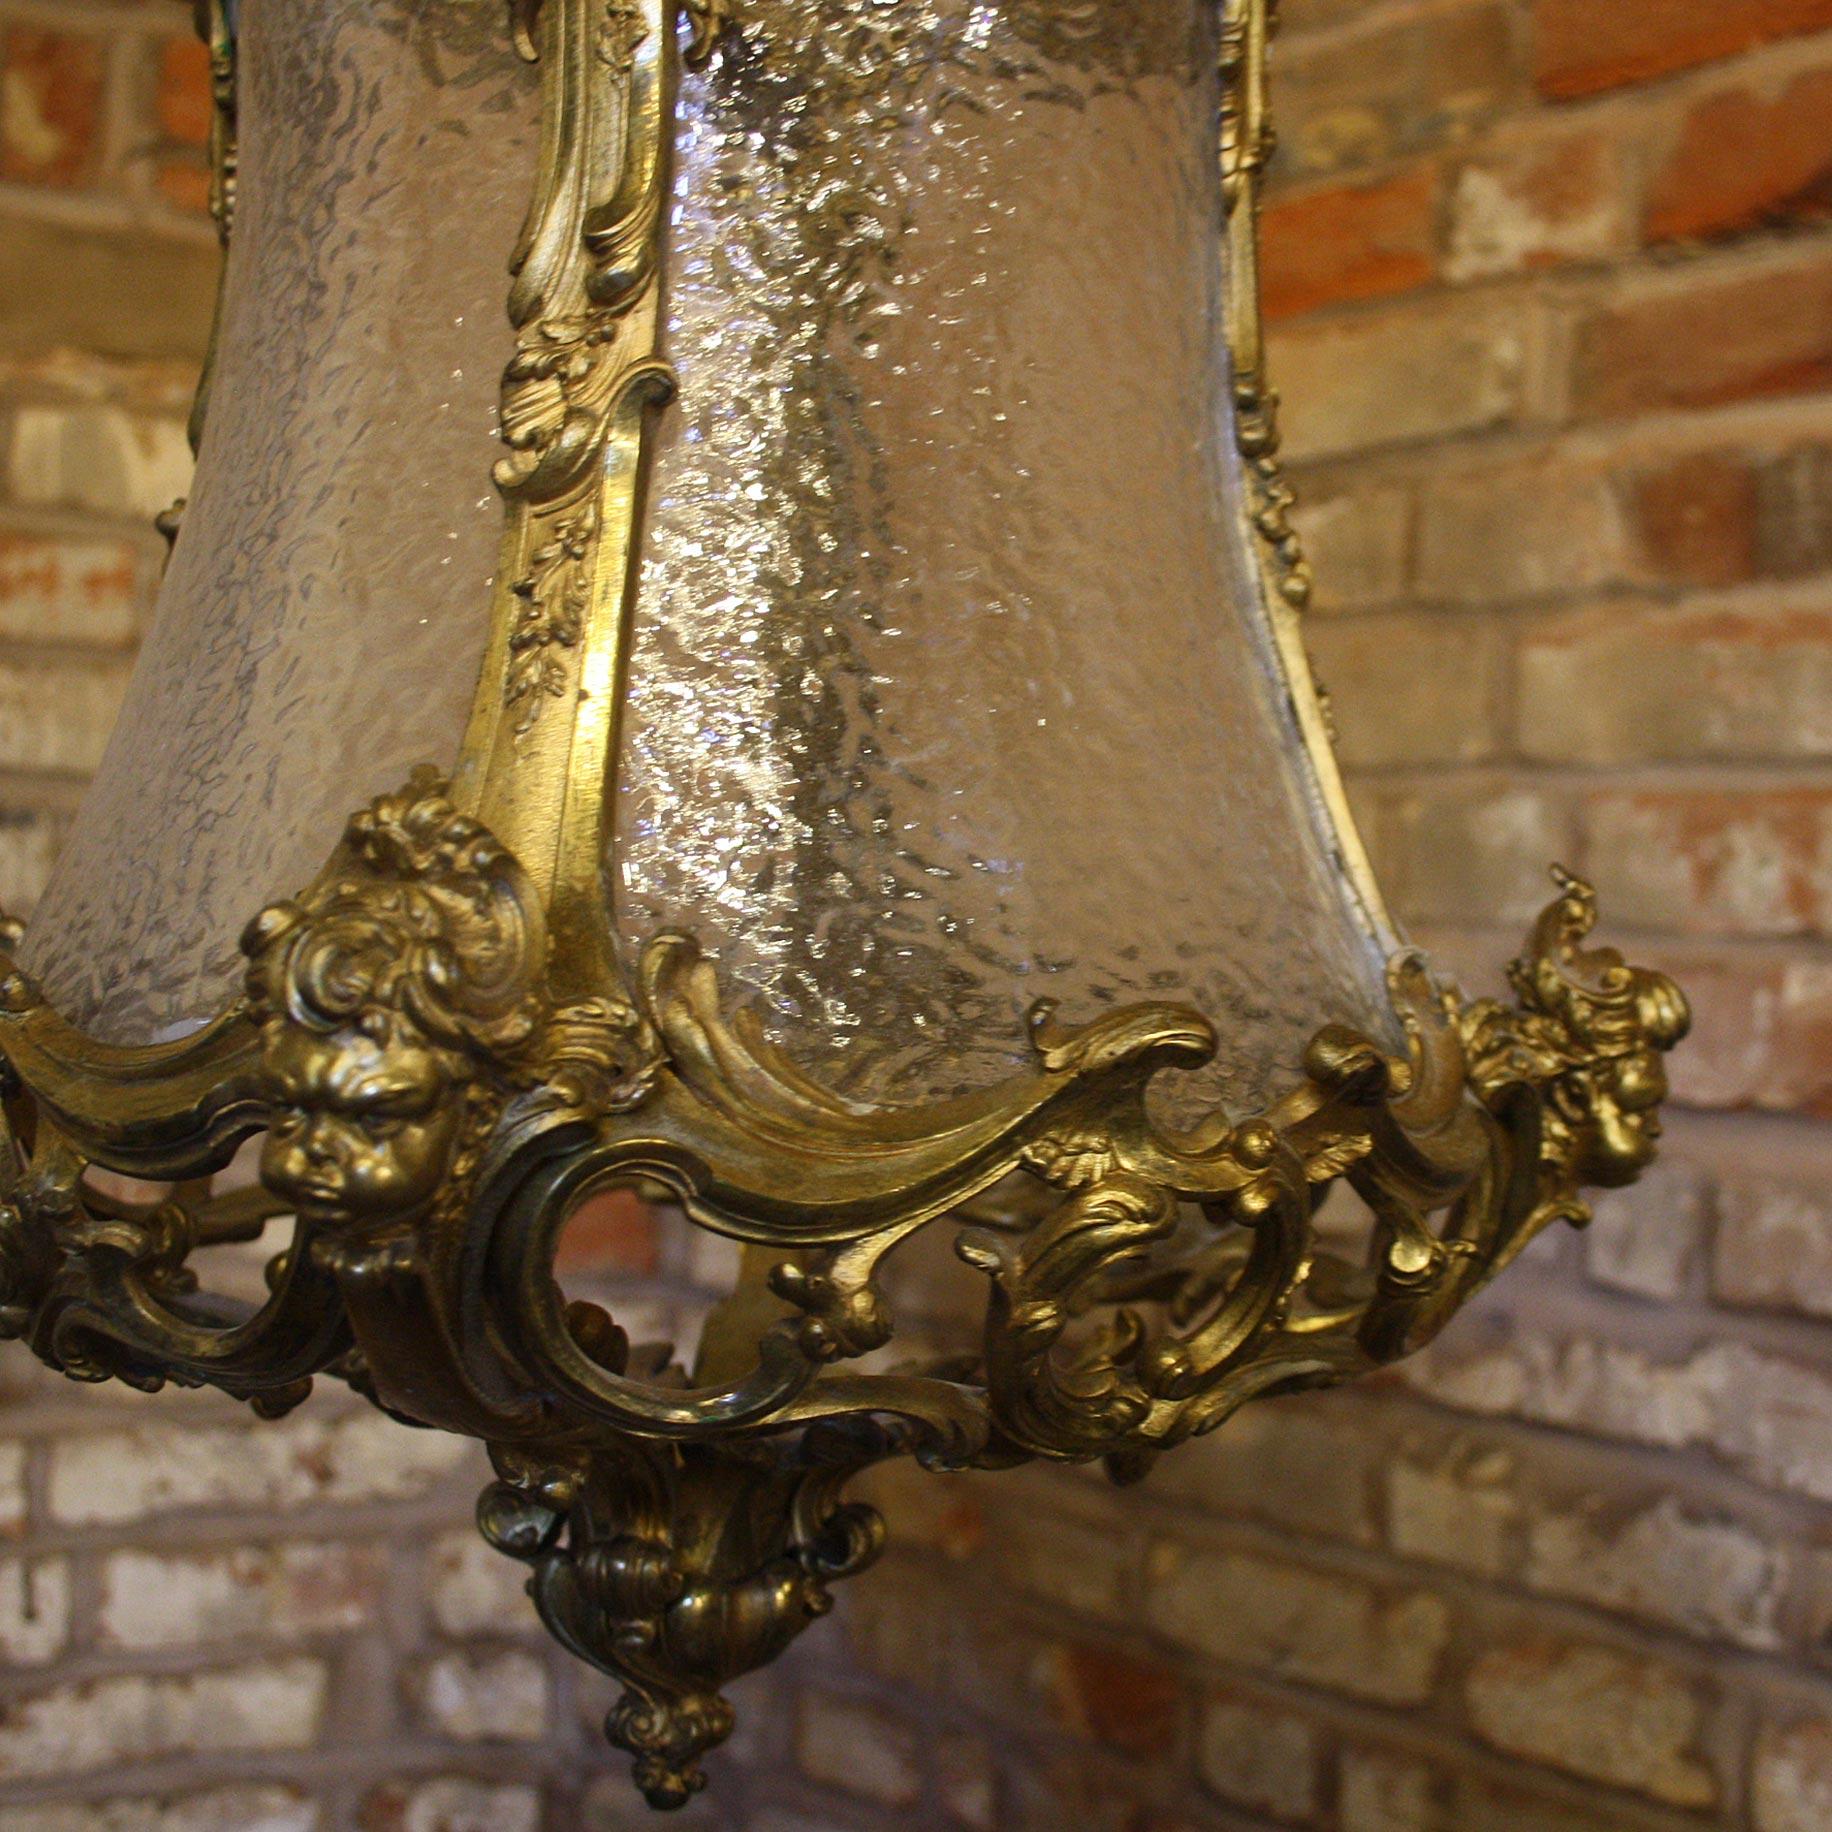 An exceptional 19th century Antique lantern fully restored and with original glass.

The gilt metal is of some of the finest quality as you can see from the Cherub heards that are placed around the lantern.

Lantern in need of wiring.